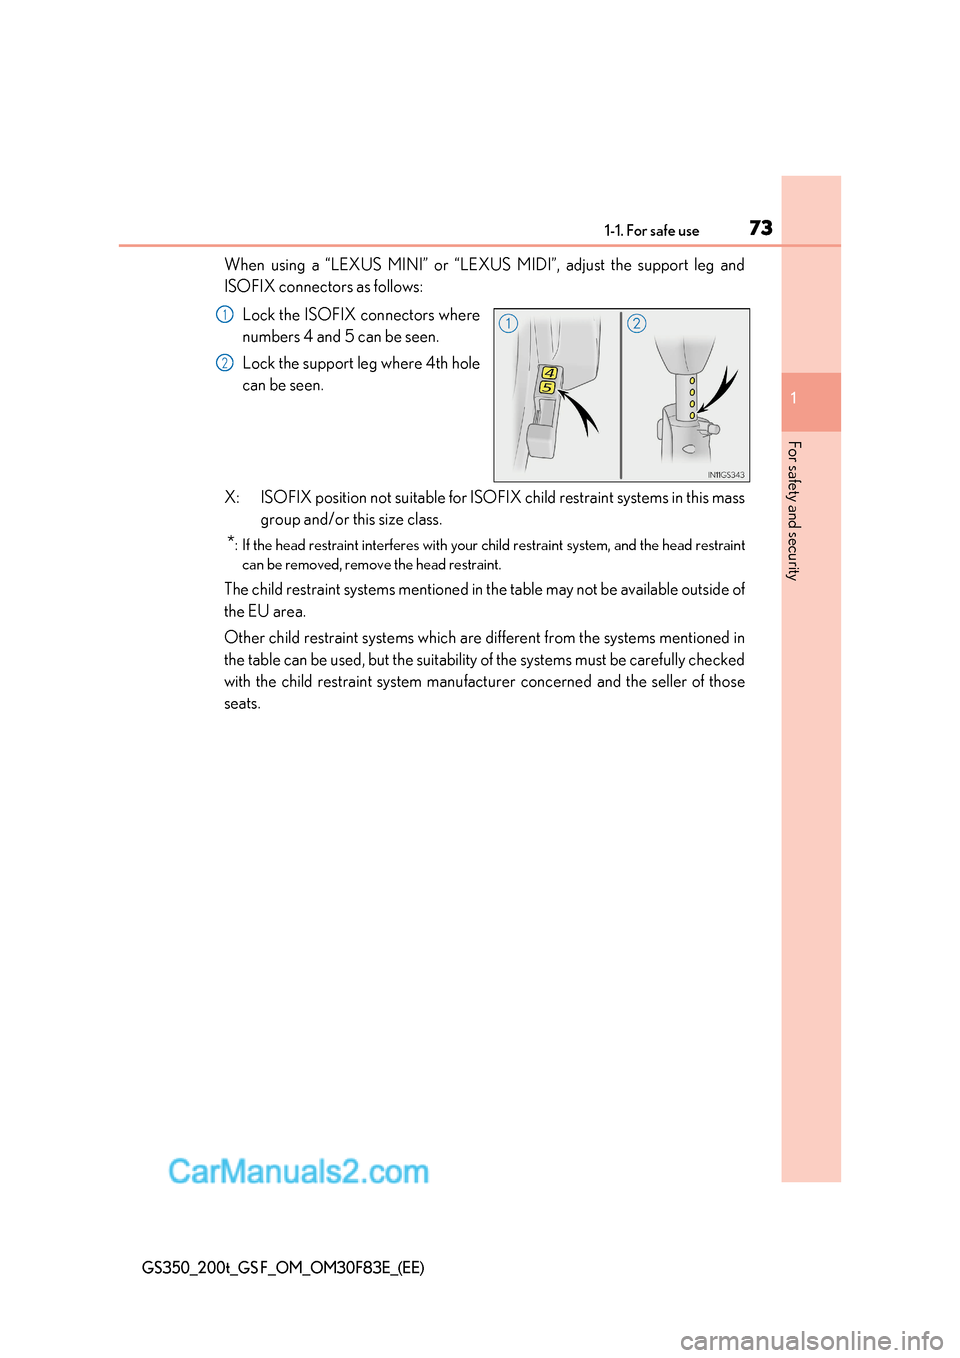 Lexus GS350 2017  Owners Manual 73
1-1. For safe use
1
For safety and security
GS350_200t_GS F_OM_OM30F83E_(EE)
When using a “LEXUS MINI” or “LEXUS MIDI”, adjust the support leg and 
ISOFIX connectors as follows:
Lock the IS